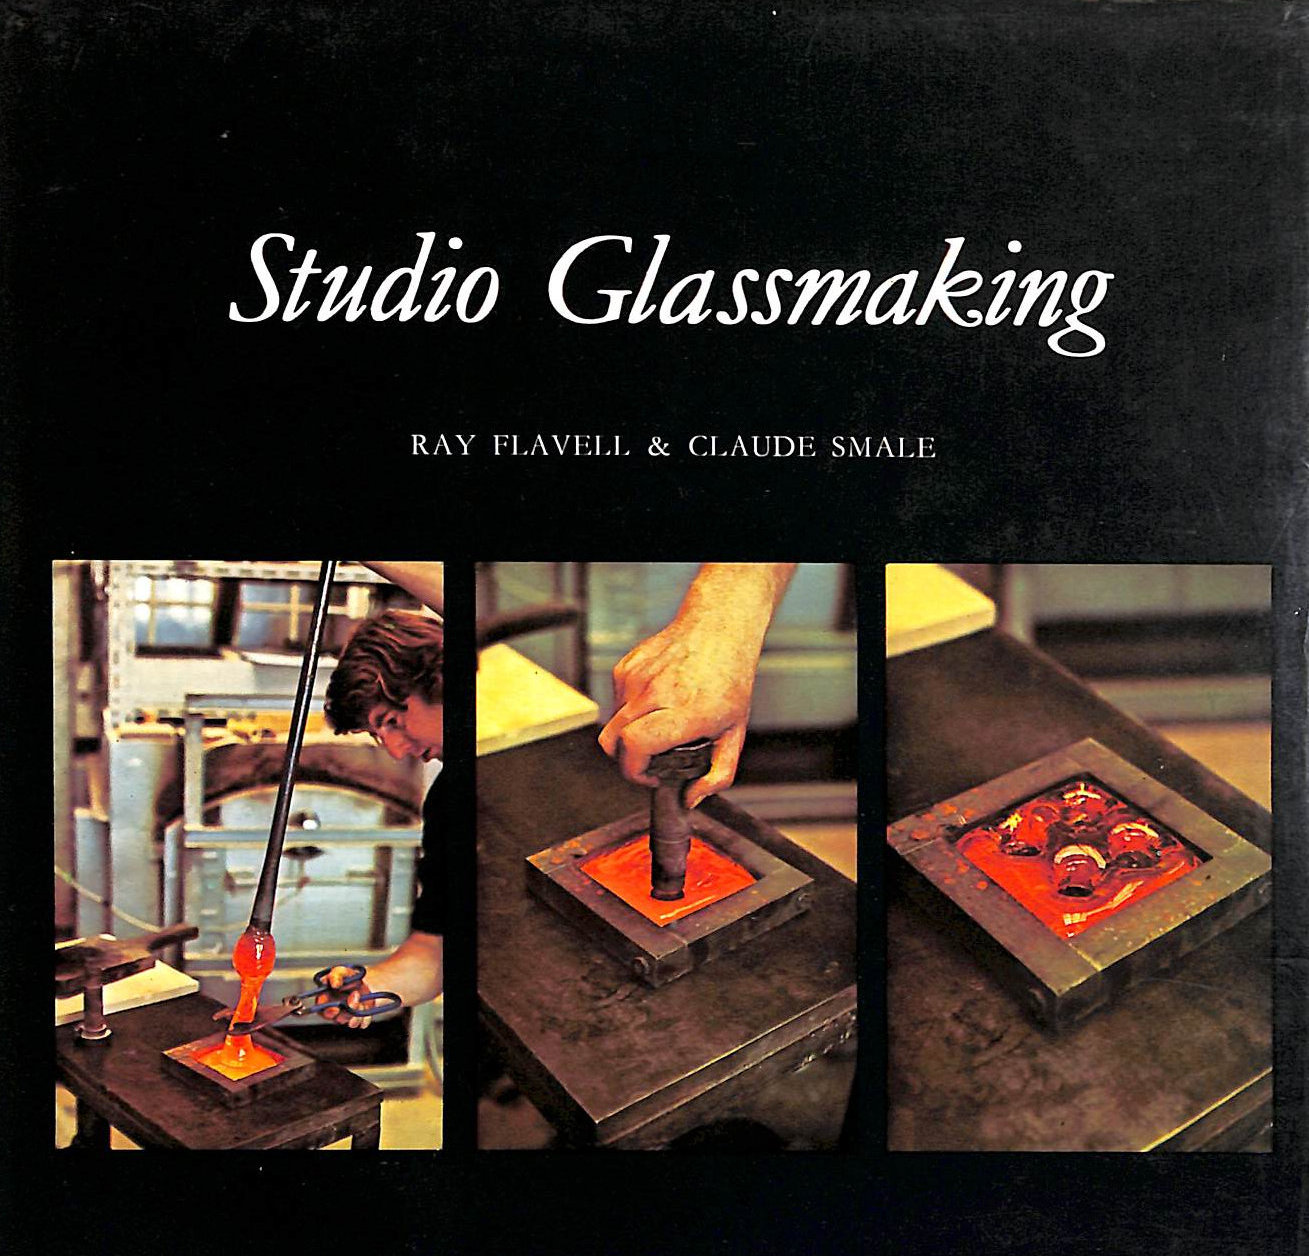 FLAVELL, RAY; SMALE, CLAUDE - Studio Glassmaking